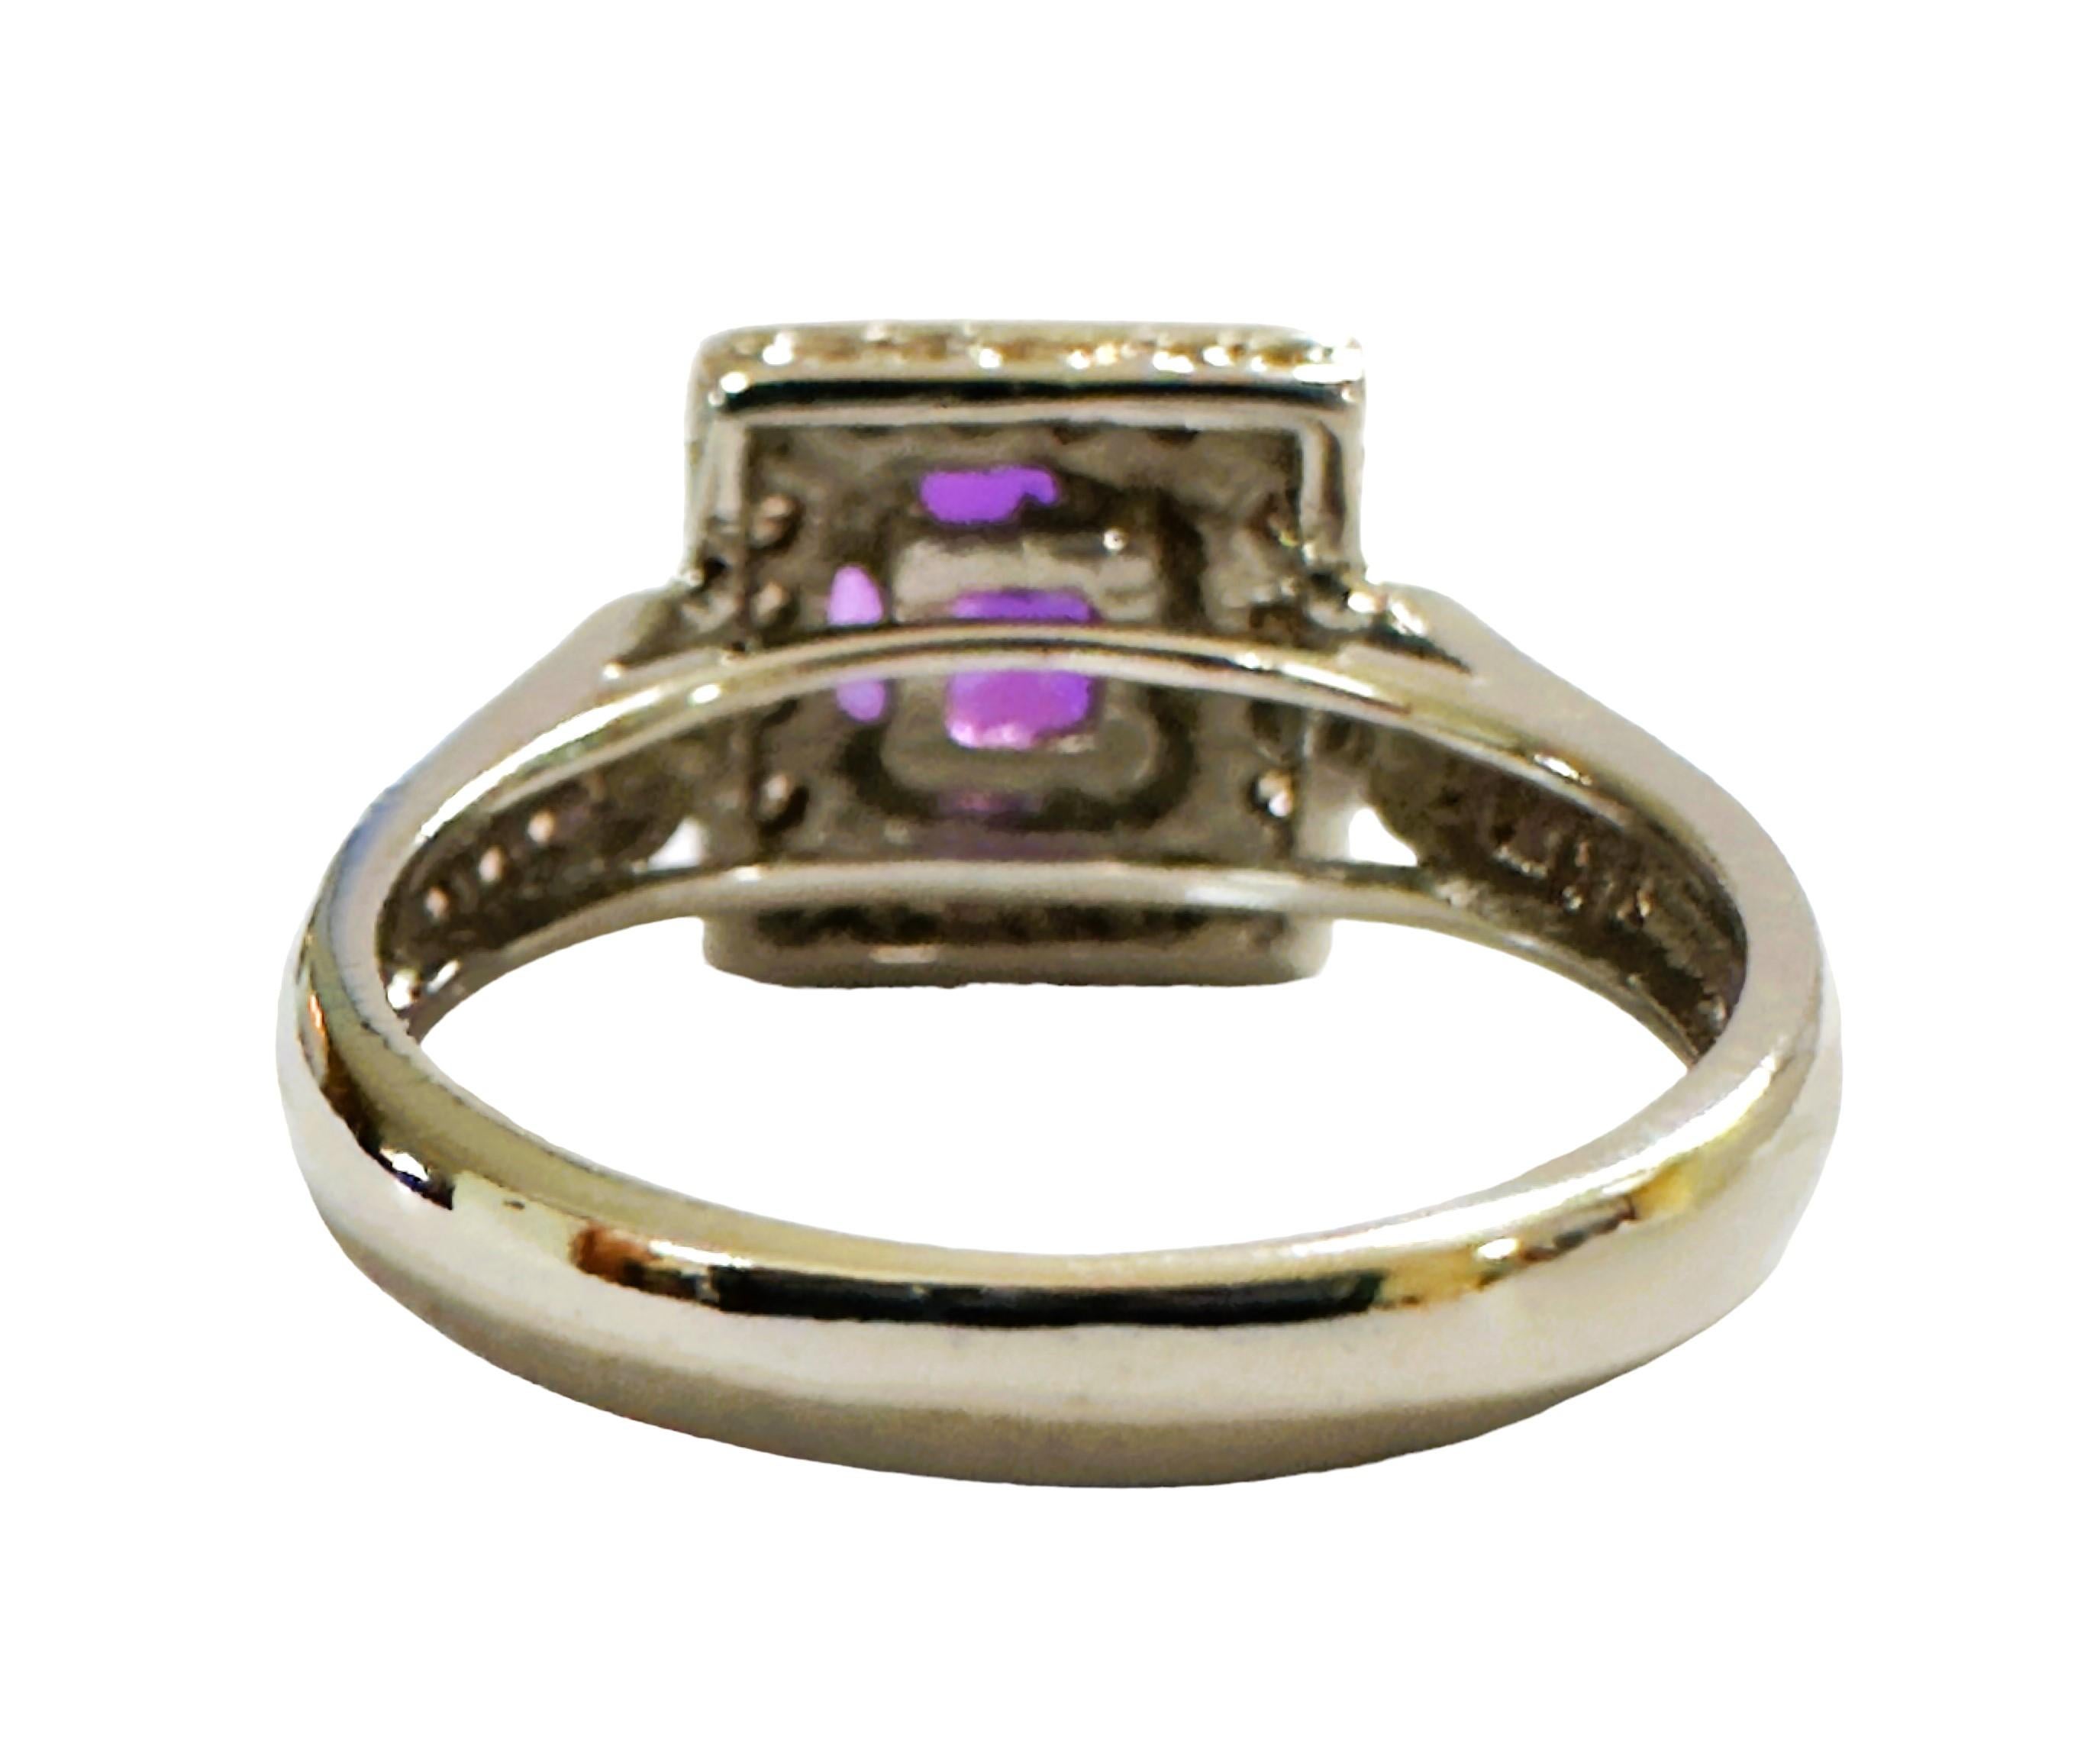 This is just a beautiful gemstone. This beautiful stone has pinks, blues and purples in it.  It's just spectacular.  The ring is a size 6.  It was mined in Africa and is just exquisite.   A very high quality stone. It is a cushion cut stone and is